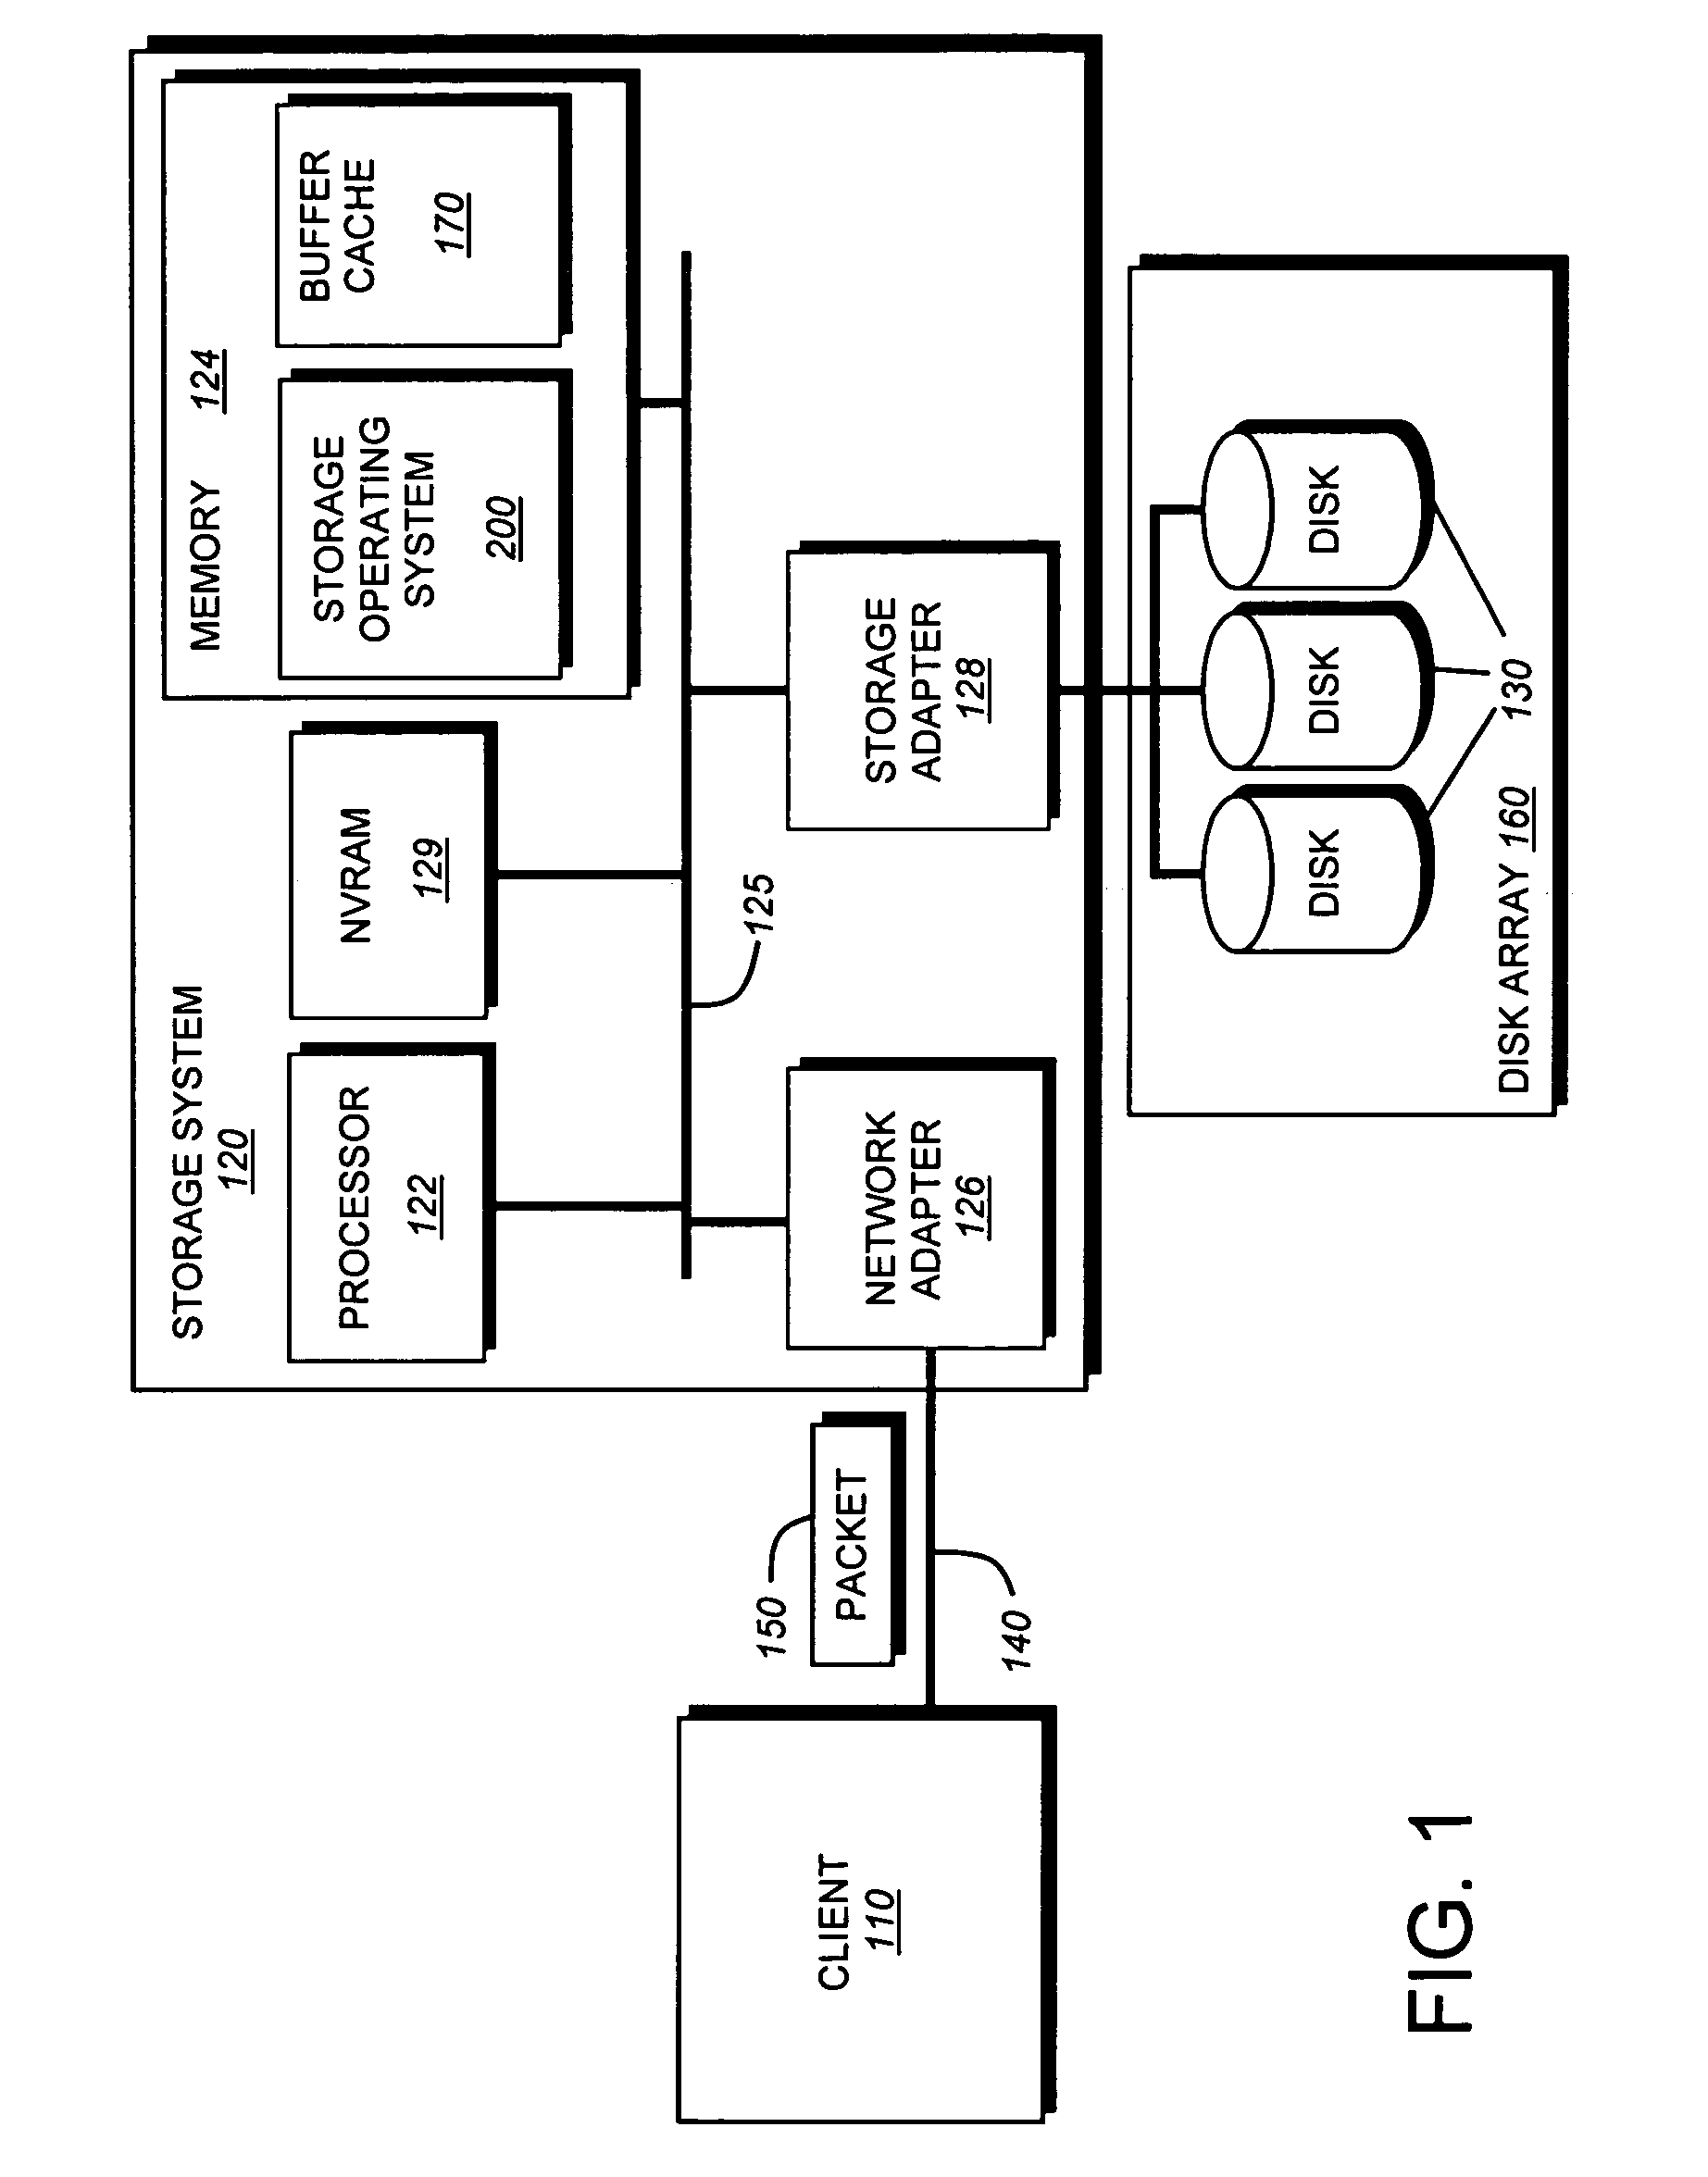 System and method for managing data deduplication of storage systems utilizing persistent consistency point images